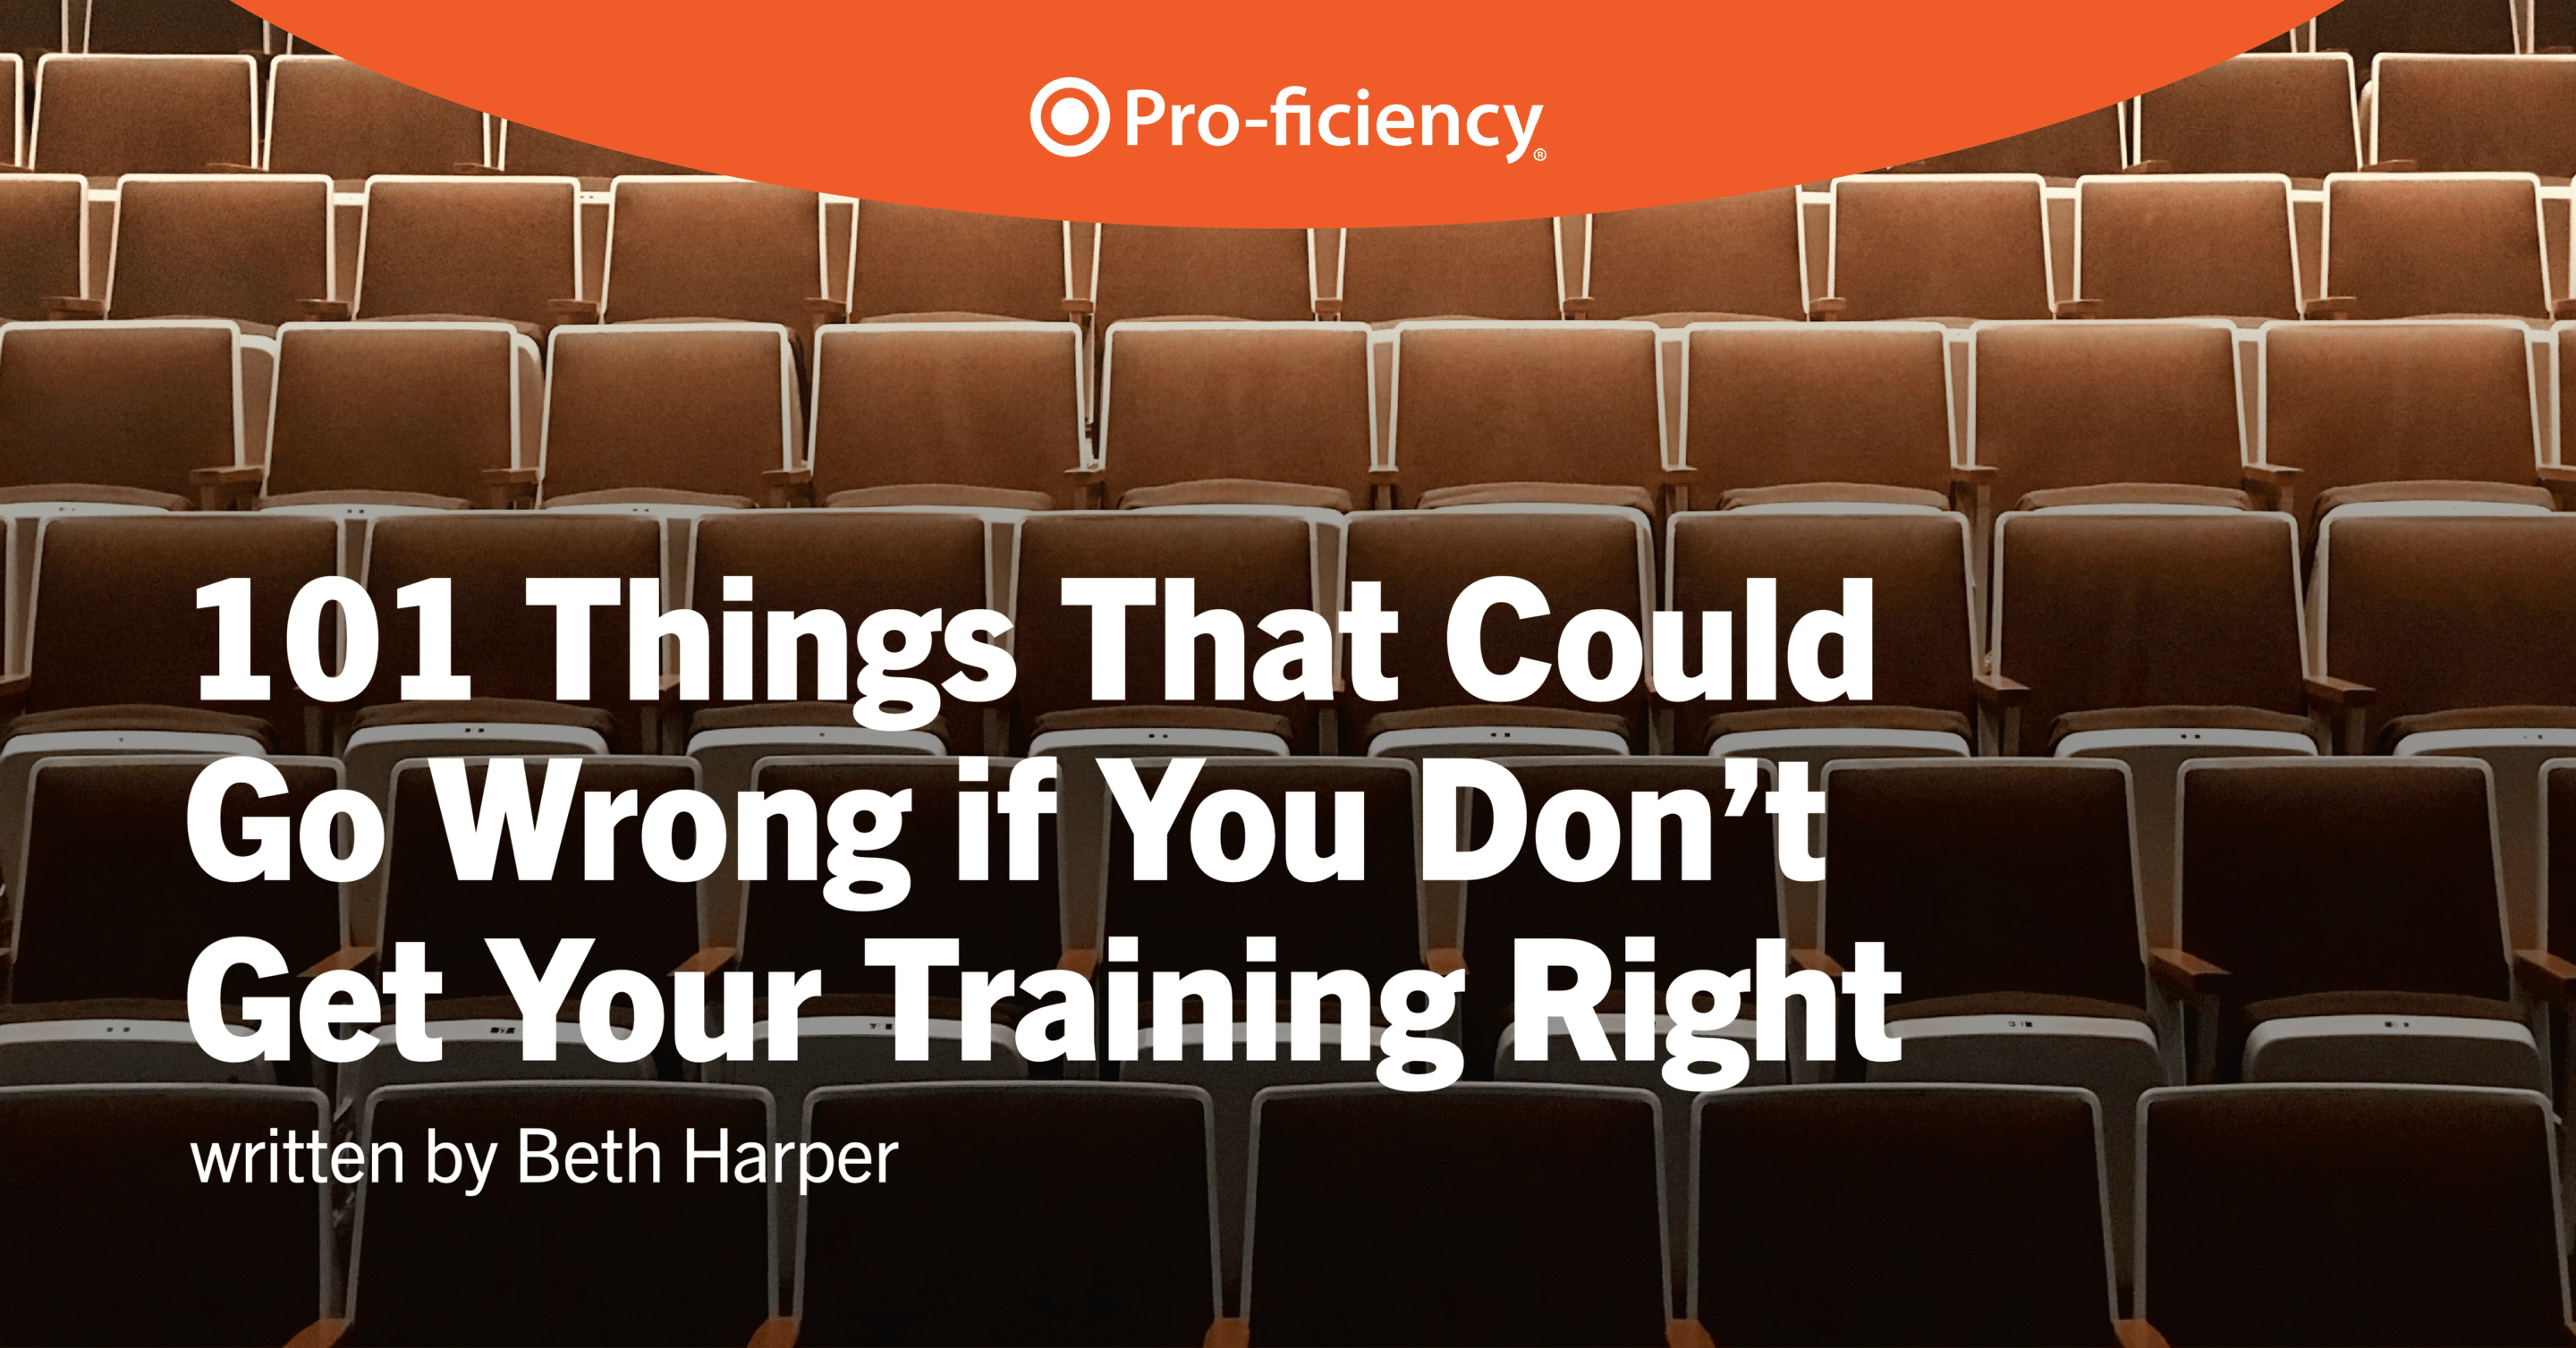 101 Things That Could Go Wrong if You Don’t Get Your Training Right